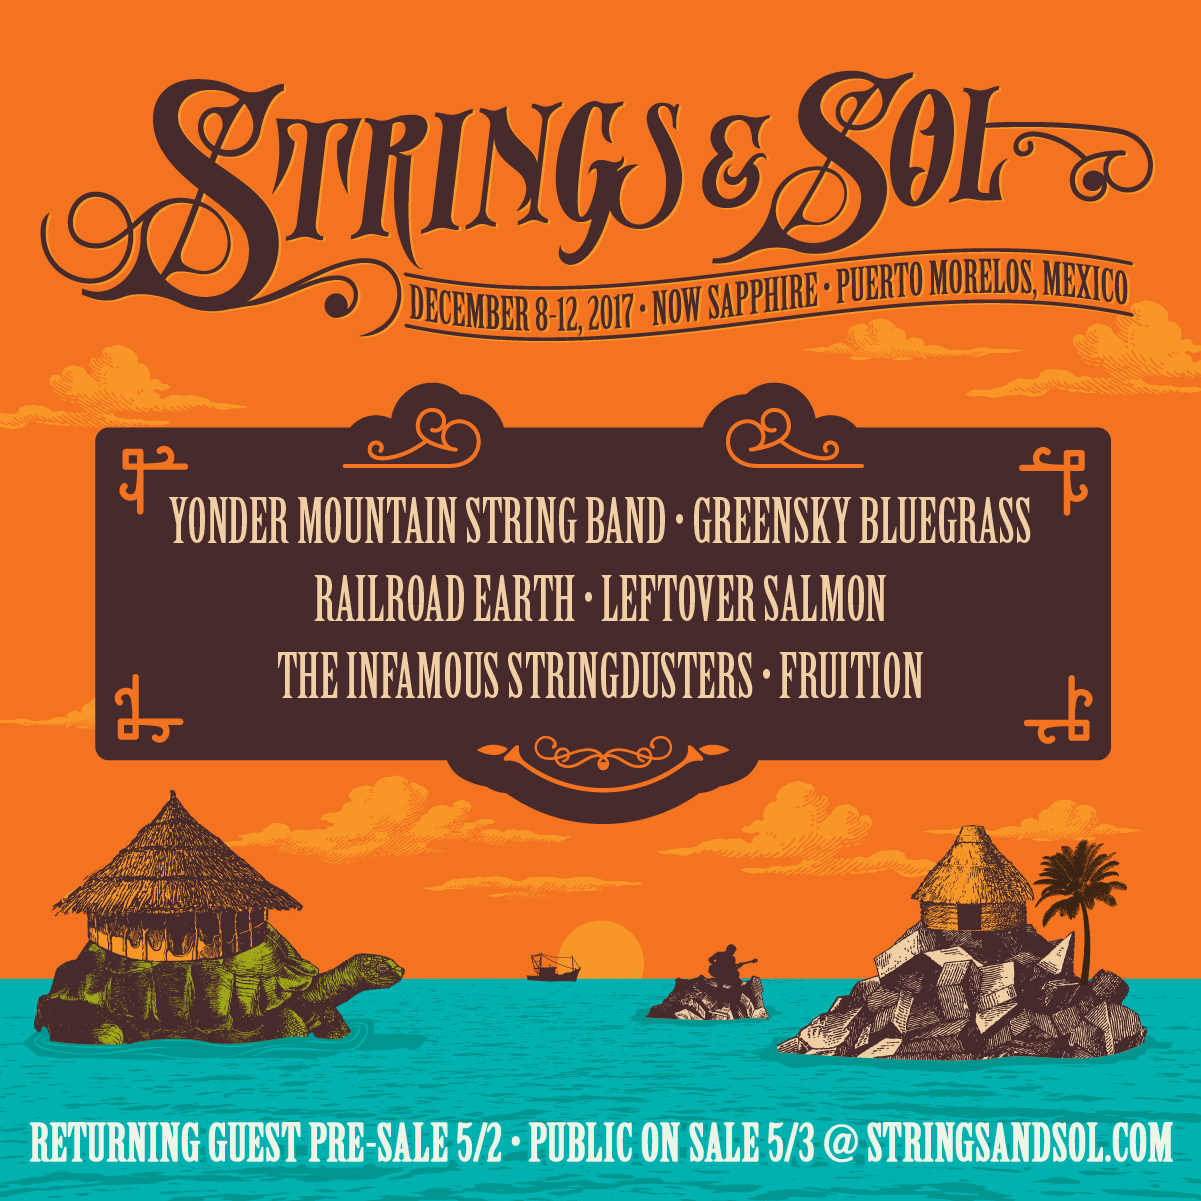 String & Sol 2017 lineup. Photo by: String & Sol